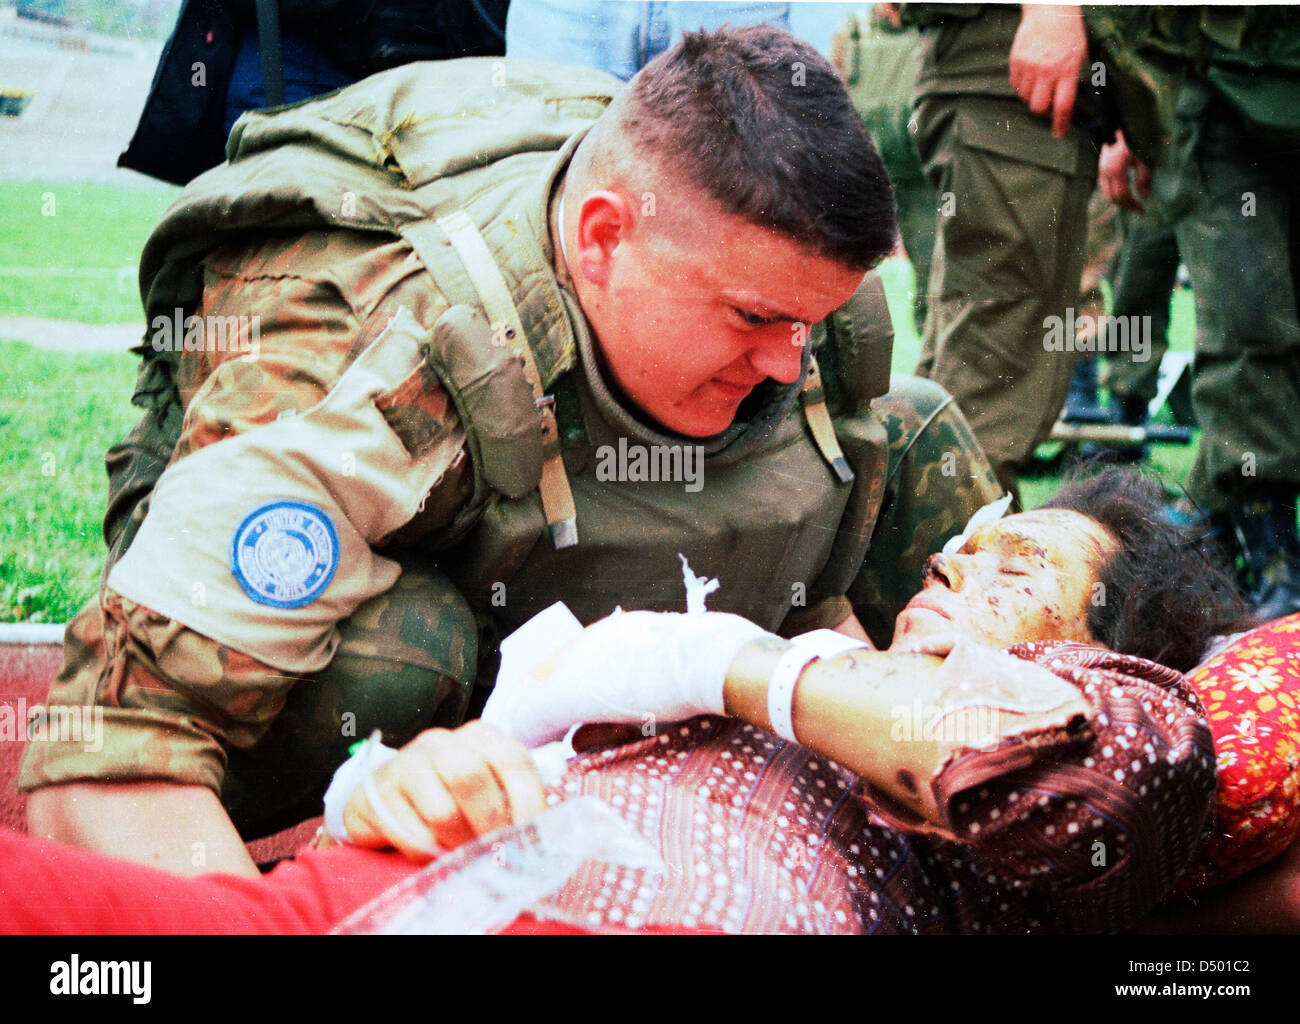 An Ukrainian soldier with the United Nations Protection Force (UNPROFOR) in Bosnia comforts a woman wounded during the siege of Gorazde at a medical evacuation center in Sarajevo, Bosnia, on Monday, April 4, 1994. Stock Photo